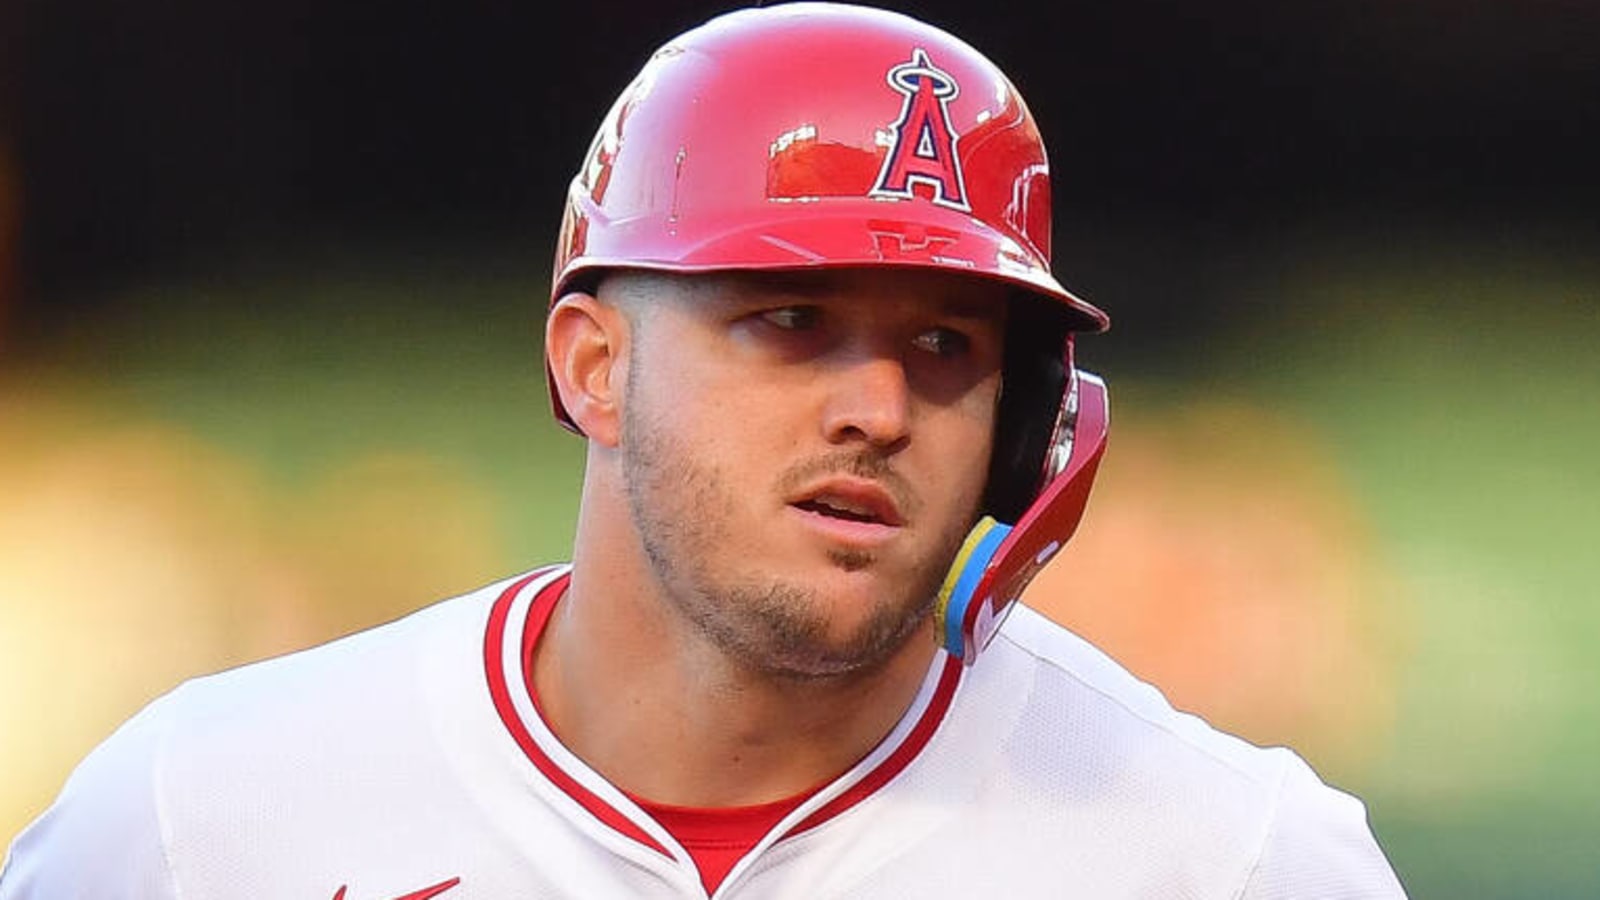 Angels' Mike Trout to undergo knee surgery